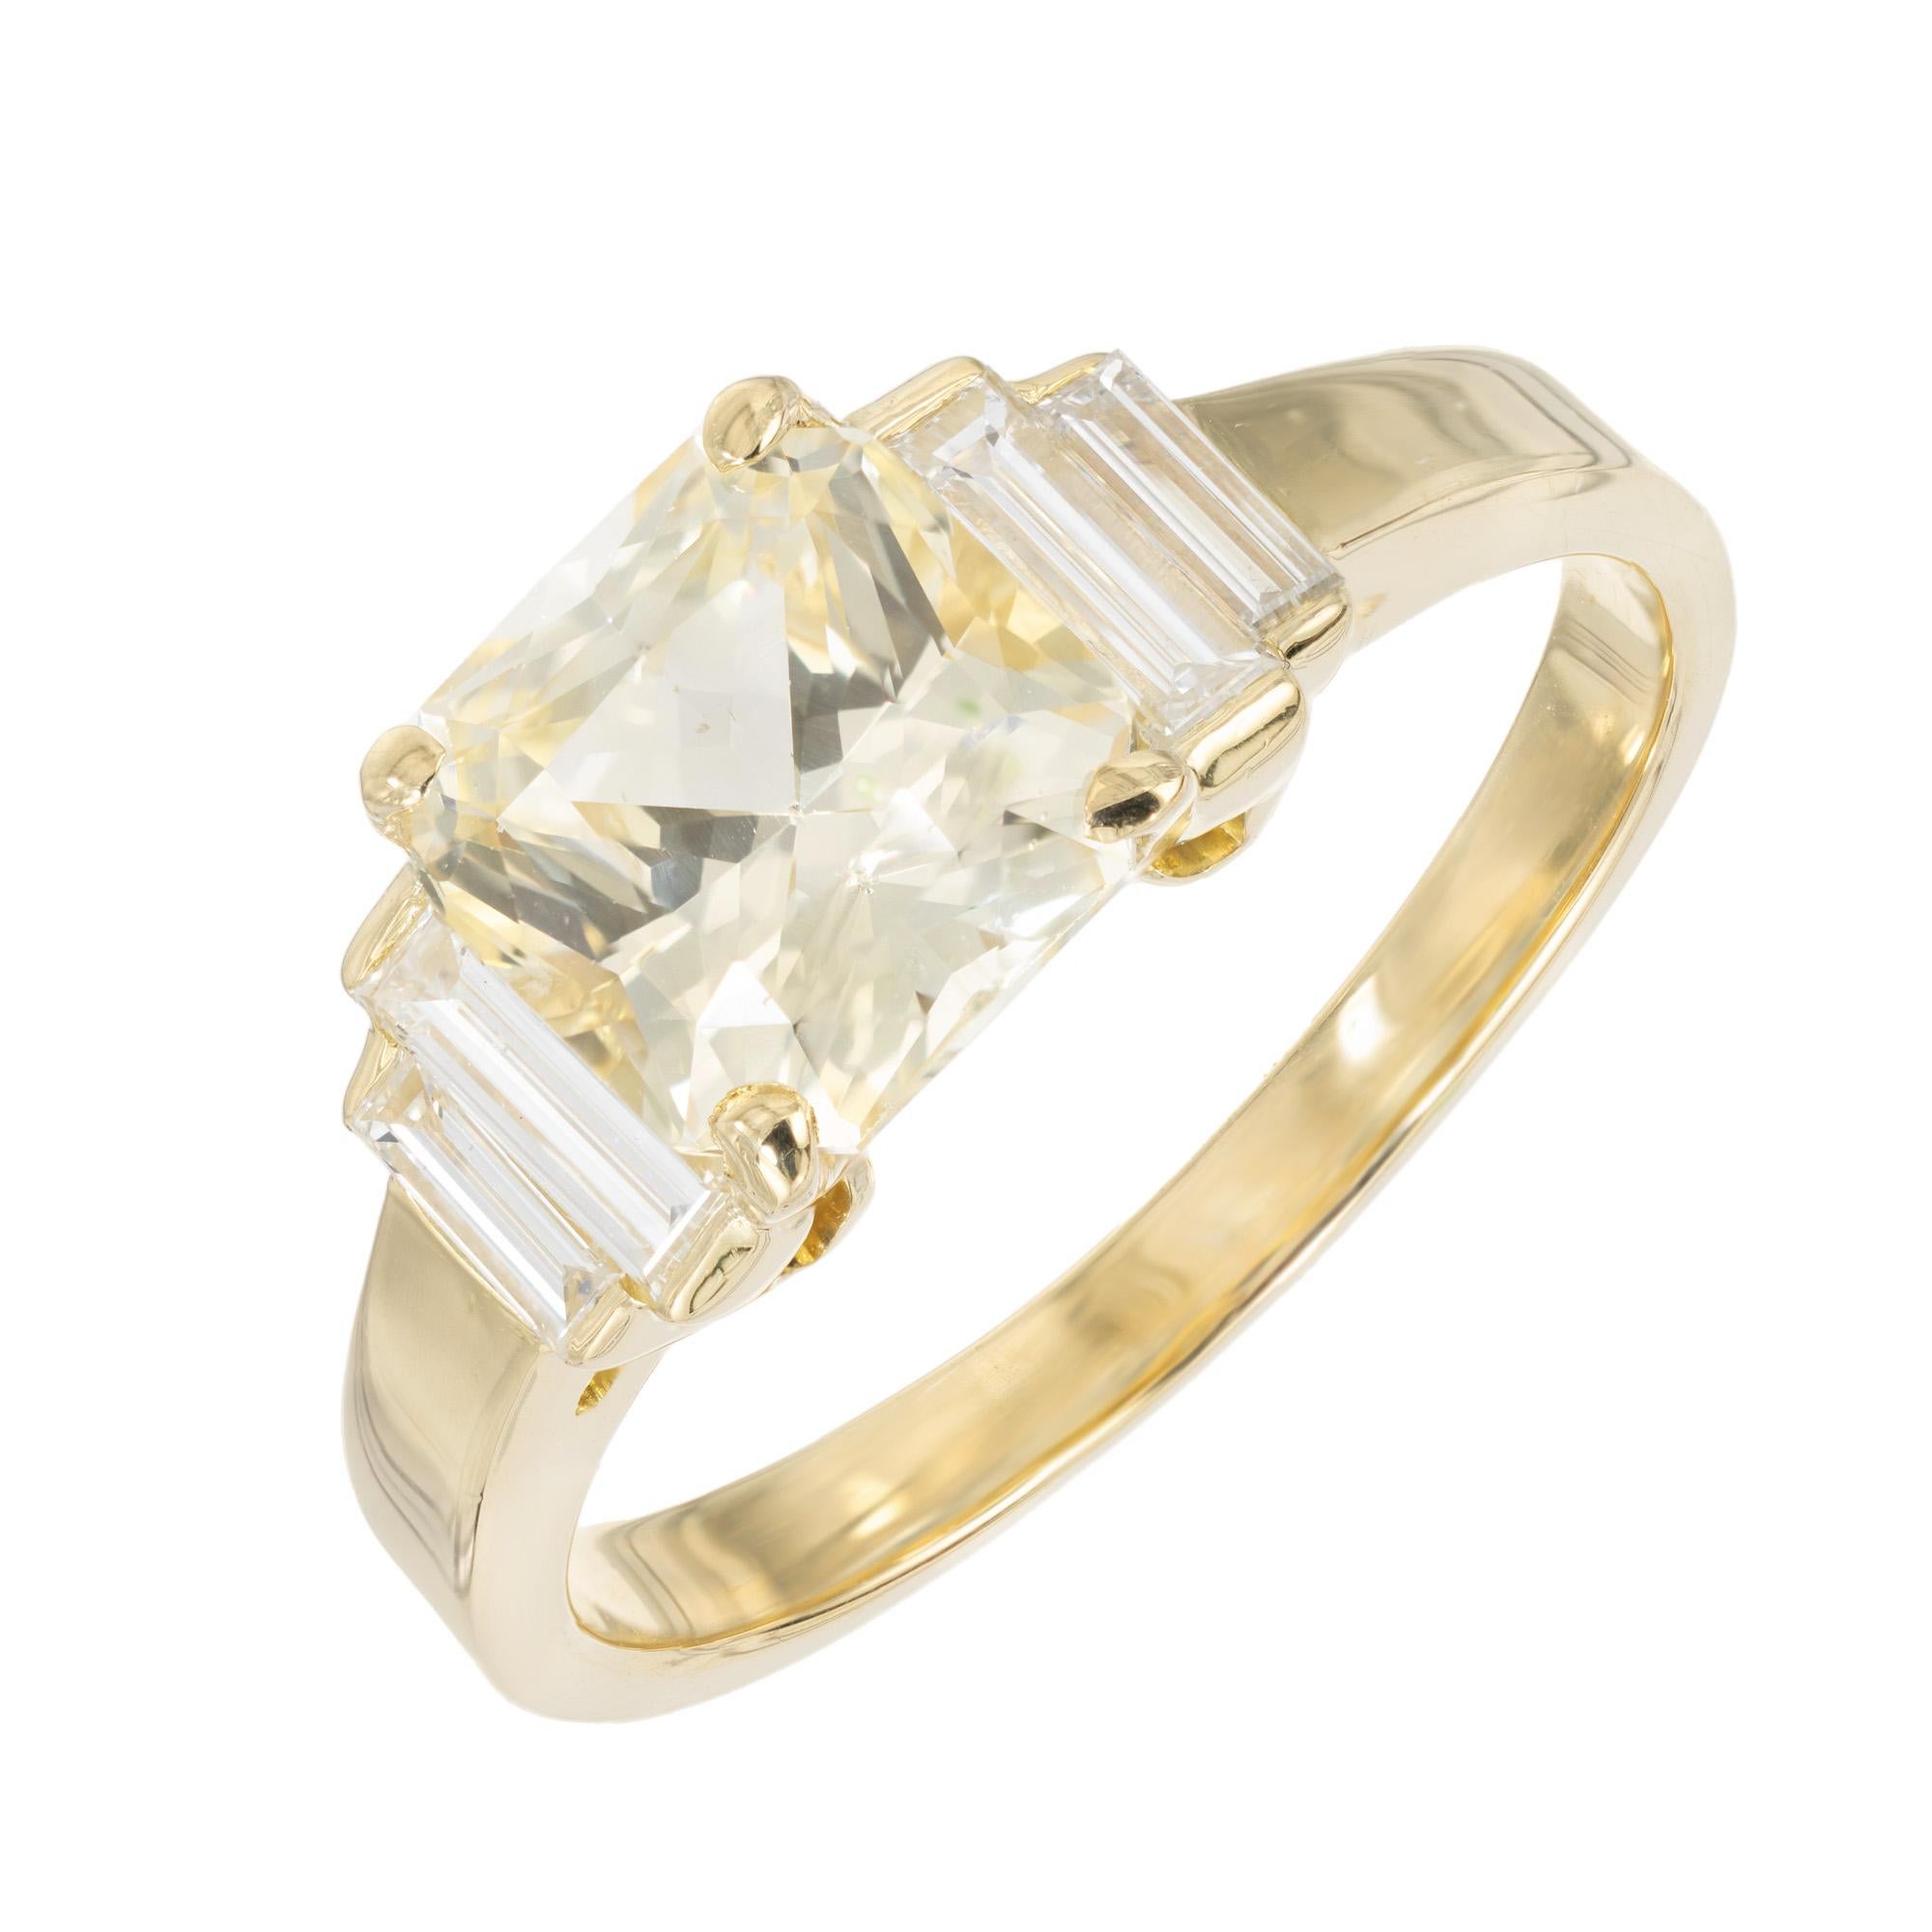 1940's Art Deco fancy color natural no heat, no enhancement Sapphires are just as rare as natural fancy color diamonds. This 2.00ct octagonal light yellow sapphire center stone is mounted in an 18k yellow gold setting and accented by 2 straight